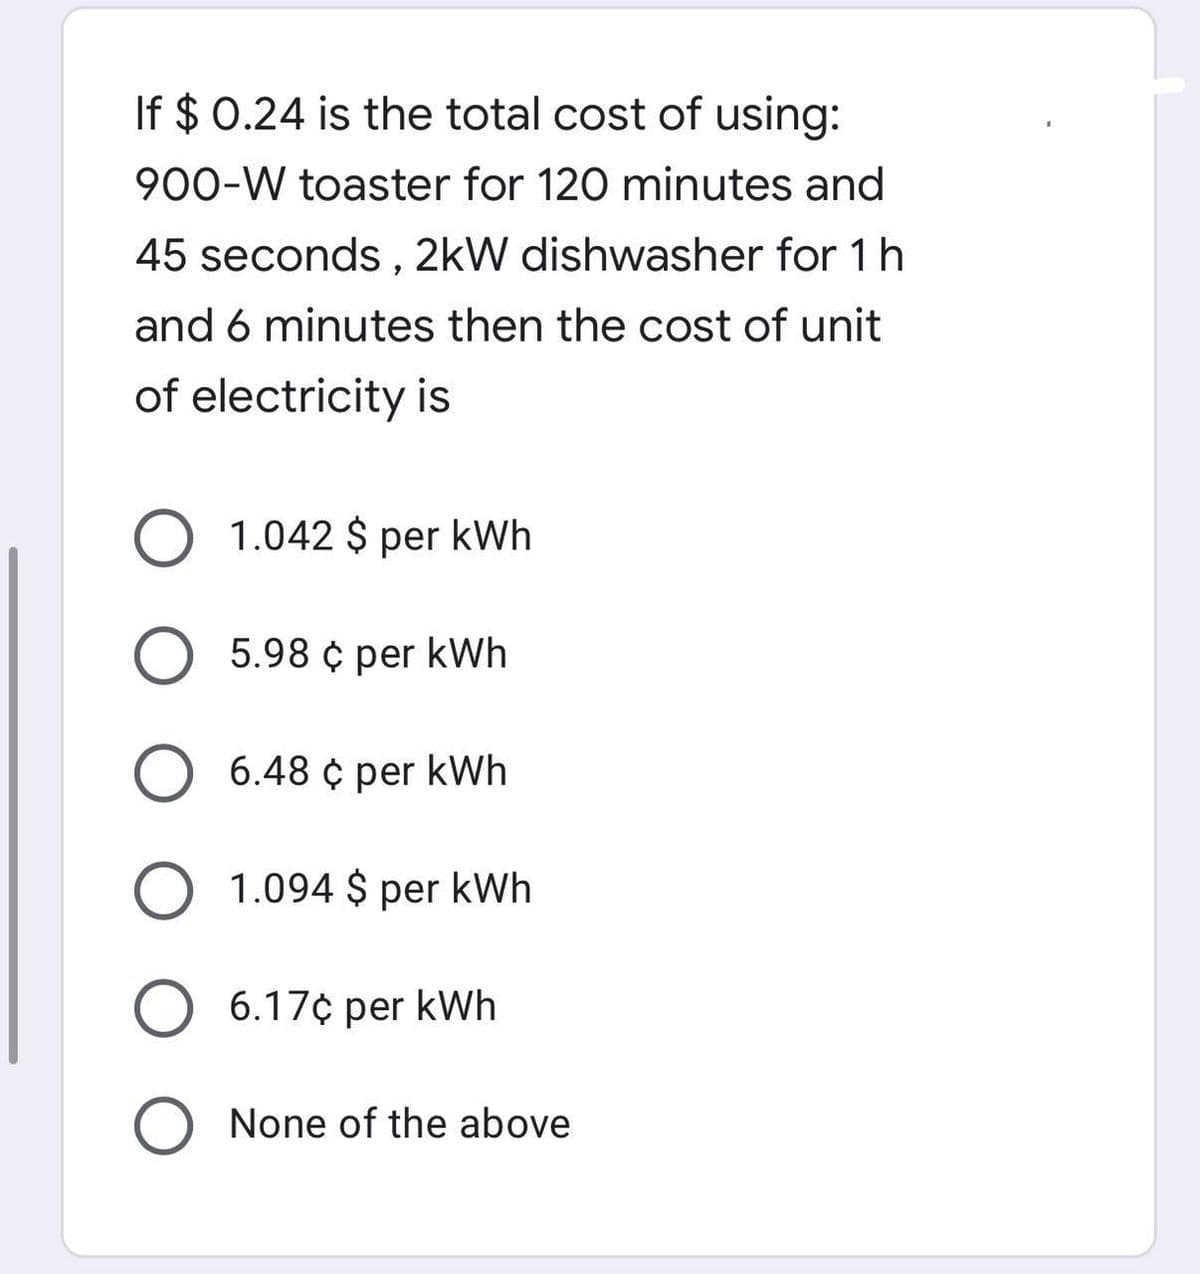 If $ 0.24 is the total cost of using:
900-W toaster for 120 minutes and
45 seconds, 2kW dishwasher for 1 h
and 6 minutes then the cost of unit
of electricity is
O 1.042 $ per kWh
5.98 ¢ per kWh
O 6.48 ¢ per kWh
1.094 $ per kWh
O 6.17¢ per kWh
O None of the above
